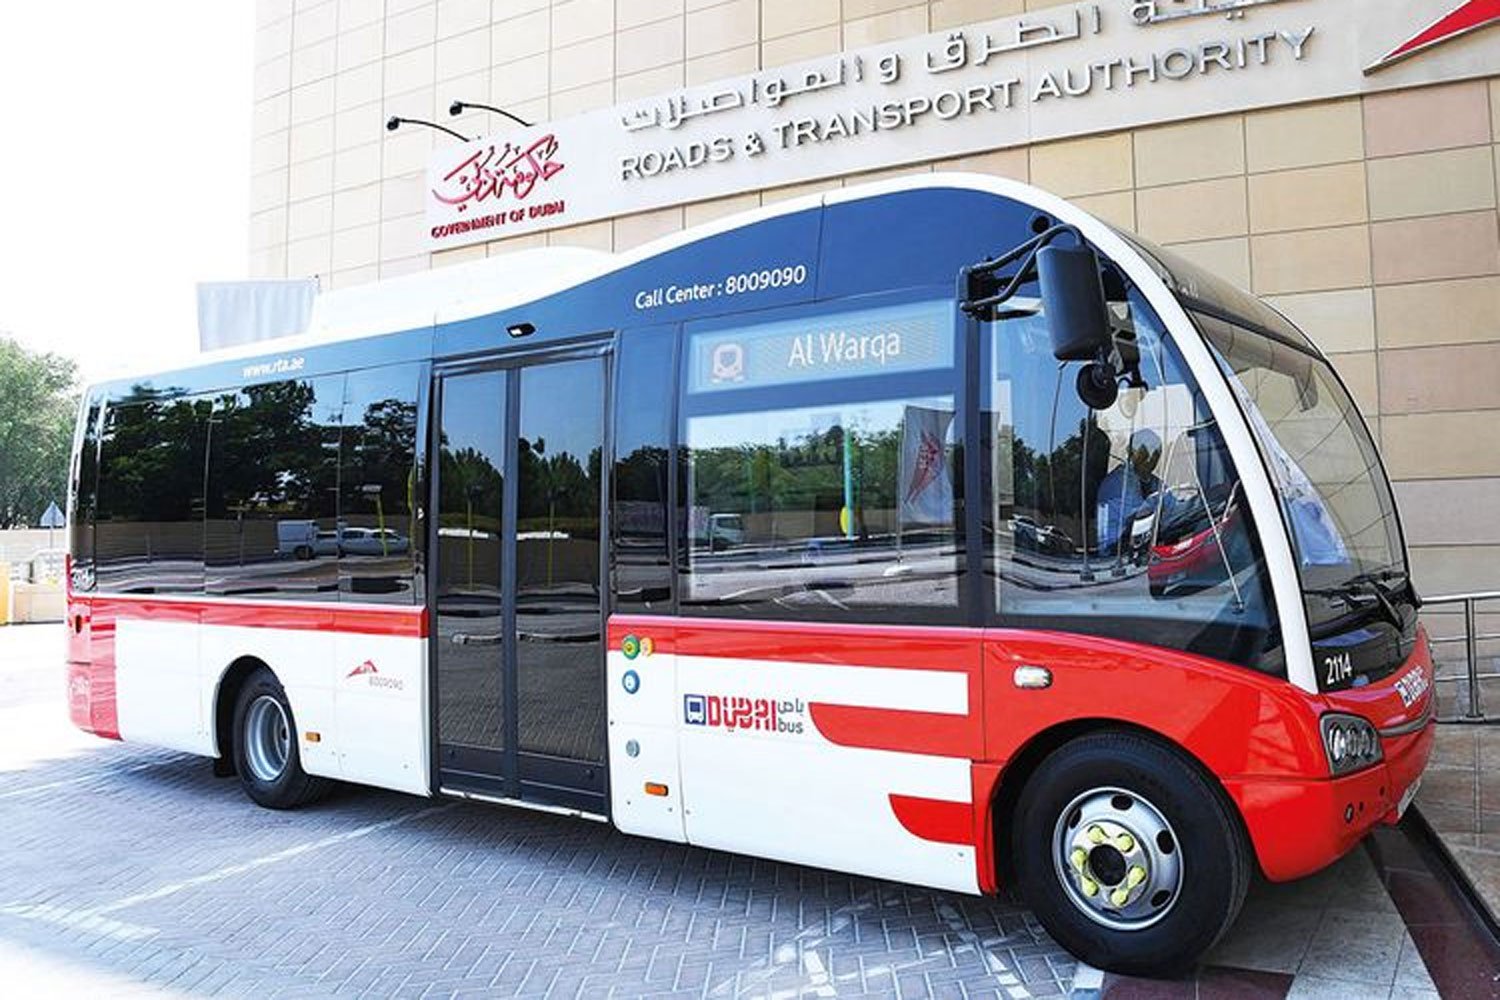 Dubai RTA has updated their service timings to 6 am to 8 pm inline with the disinfection program which will be conducted after to control the virus spread.